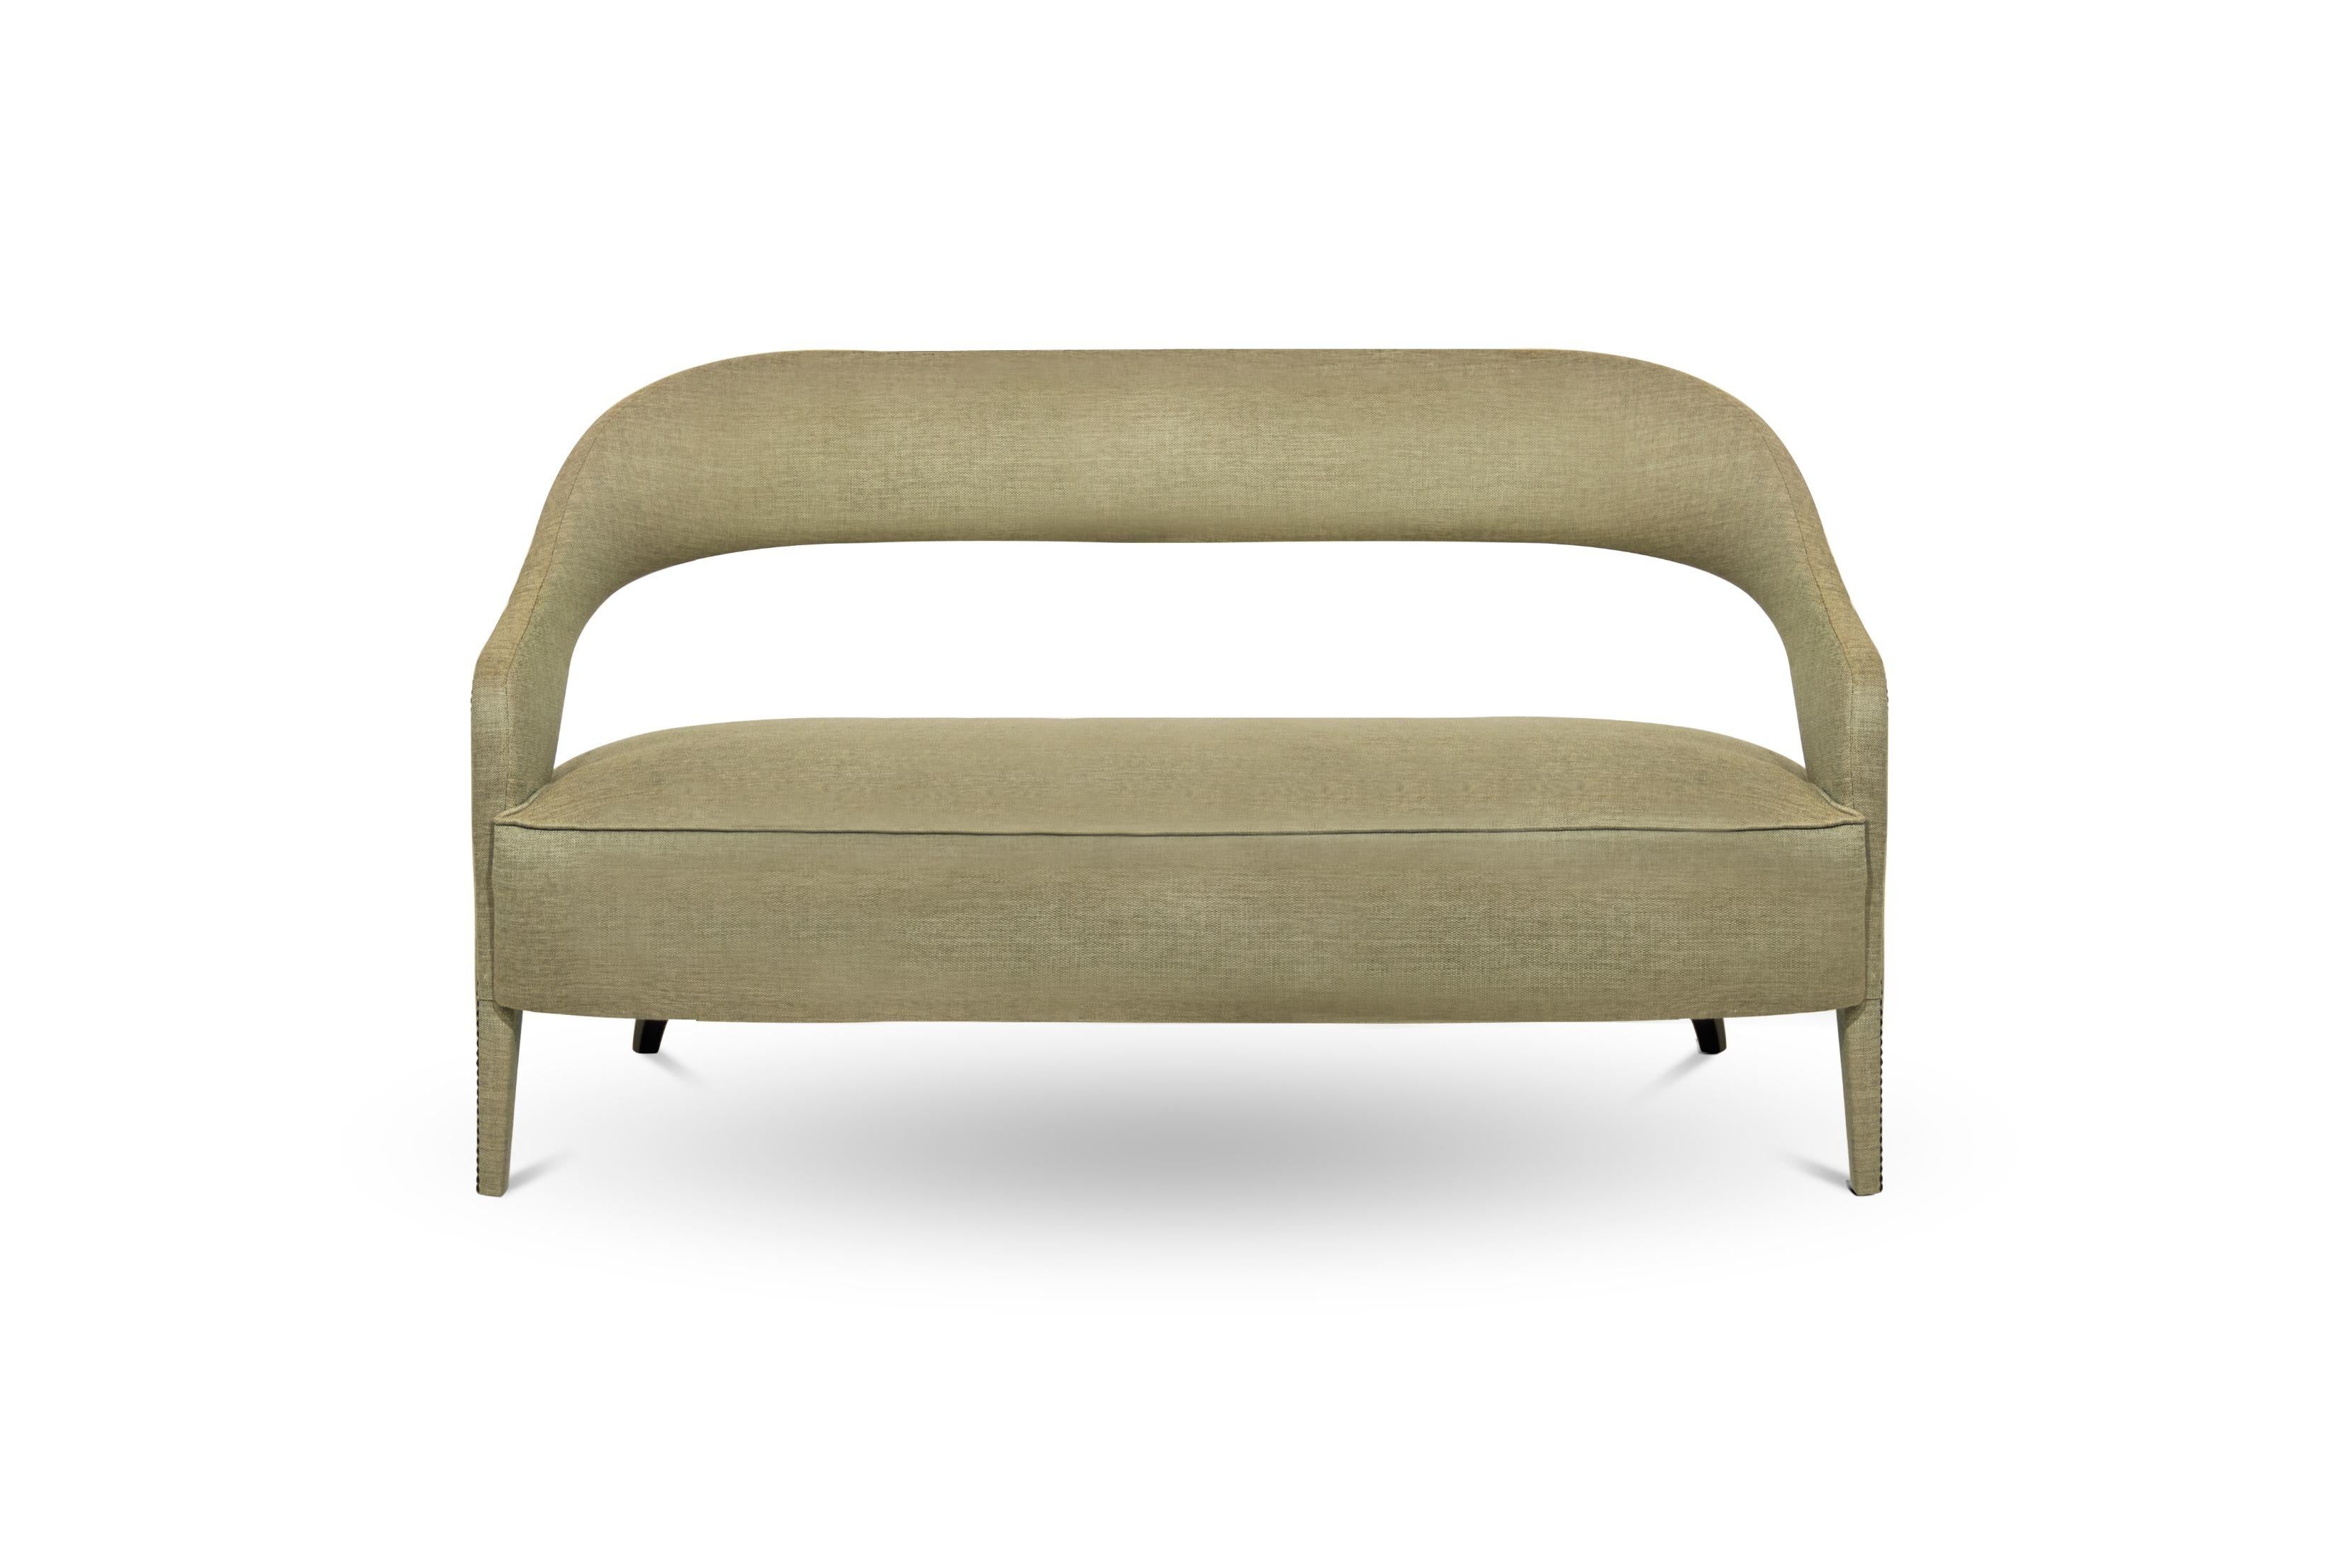 In Roman mythology, Tellus is the goddess of the Earth. TELLUS Sofa honors its deity aura. The twill fabric, nailhead trim and the back legs in matte lacquered add subtle sophistication, making this fabric sofa an elegant piece able to fit in any